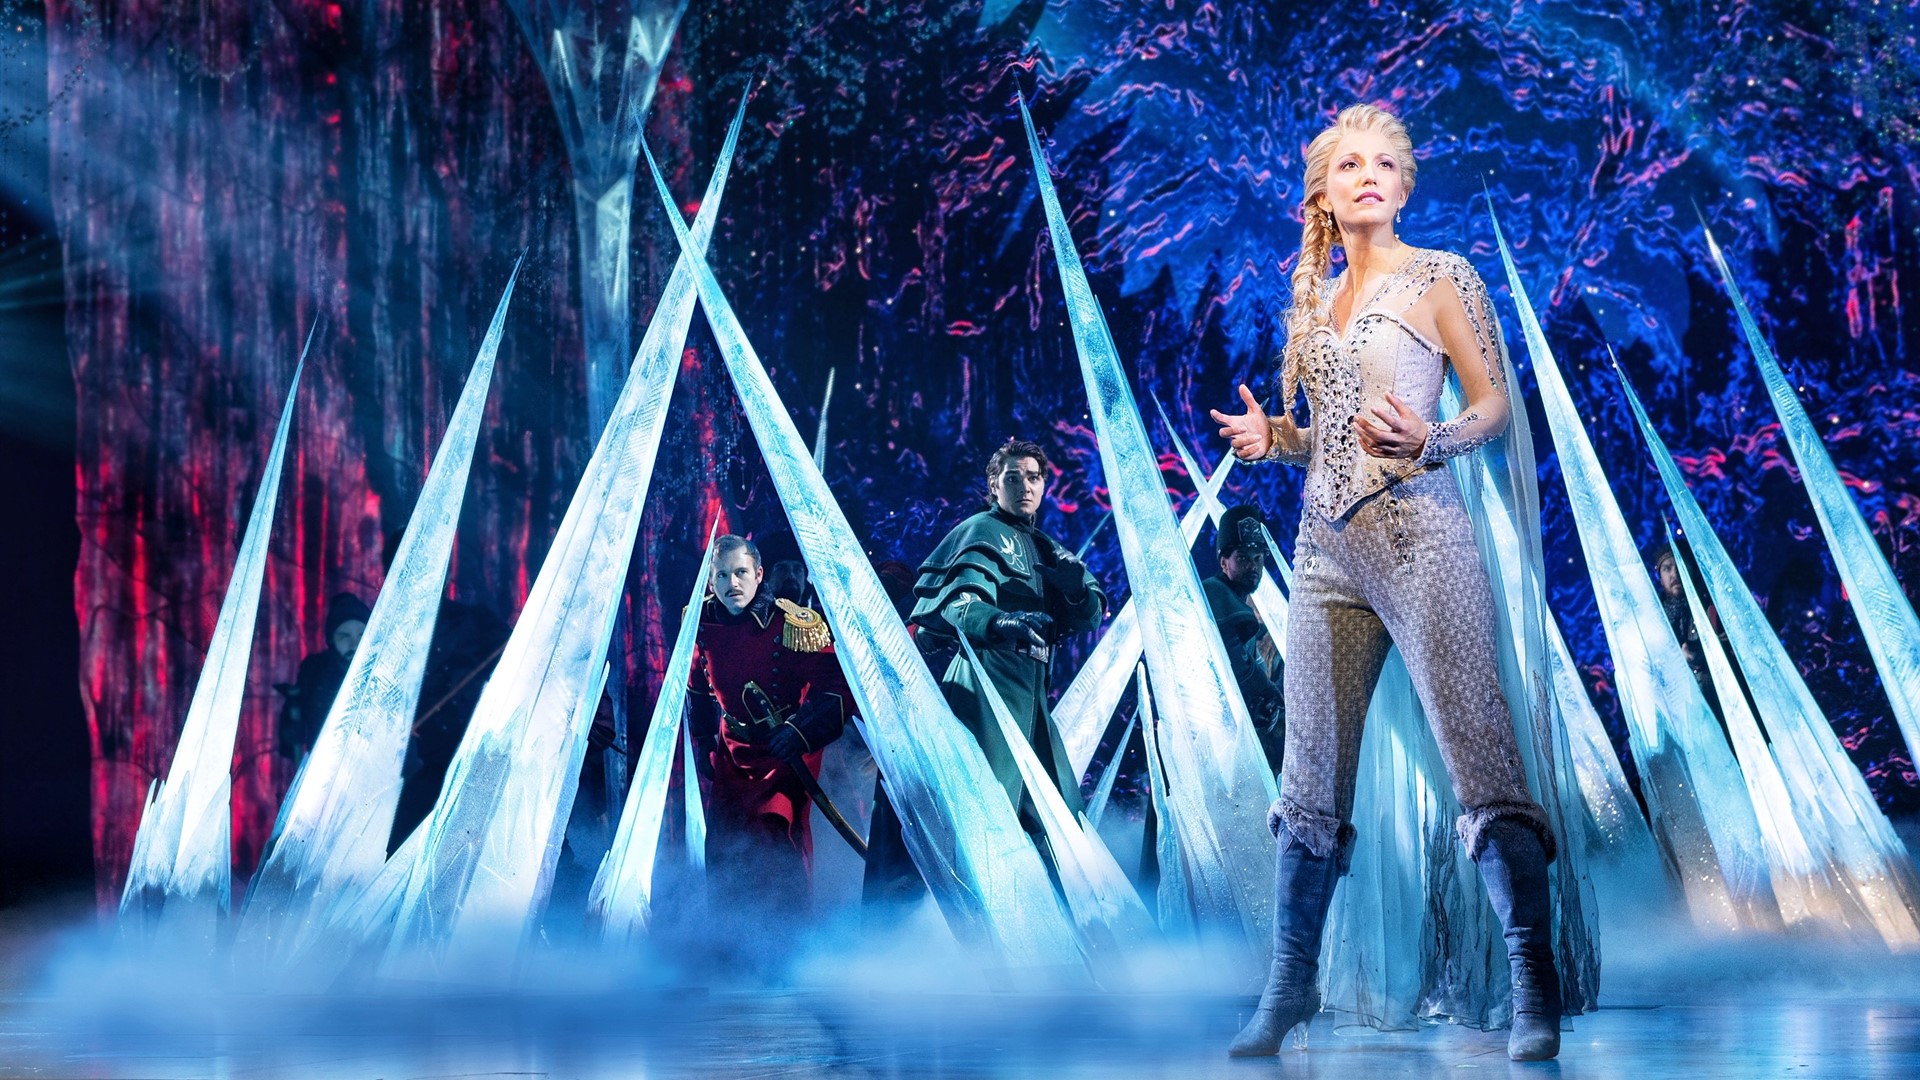 Two Disney classics hit the PNW in big ways: Frozen and Cinderella. Sponsored by Seattle Center